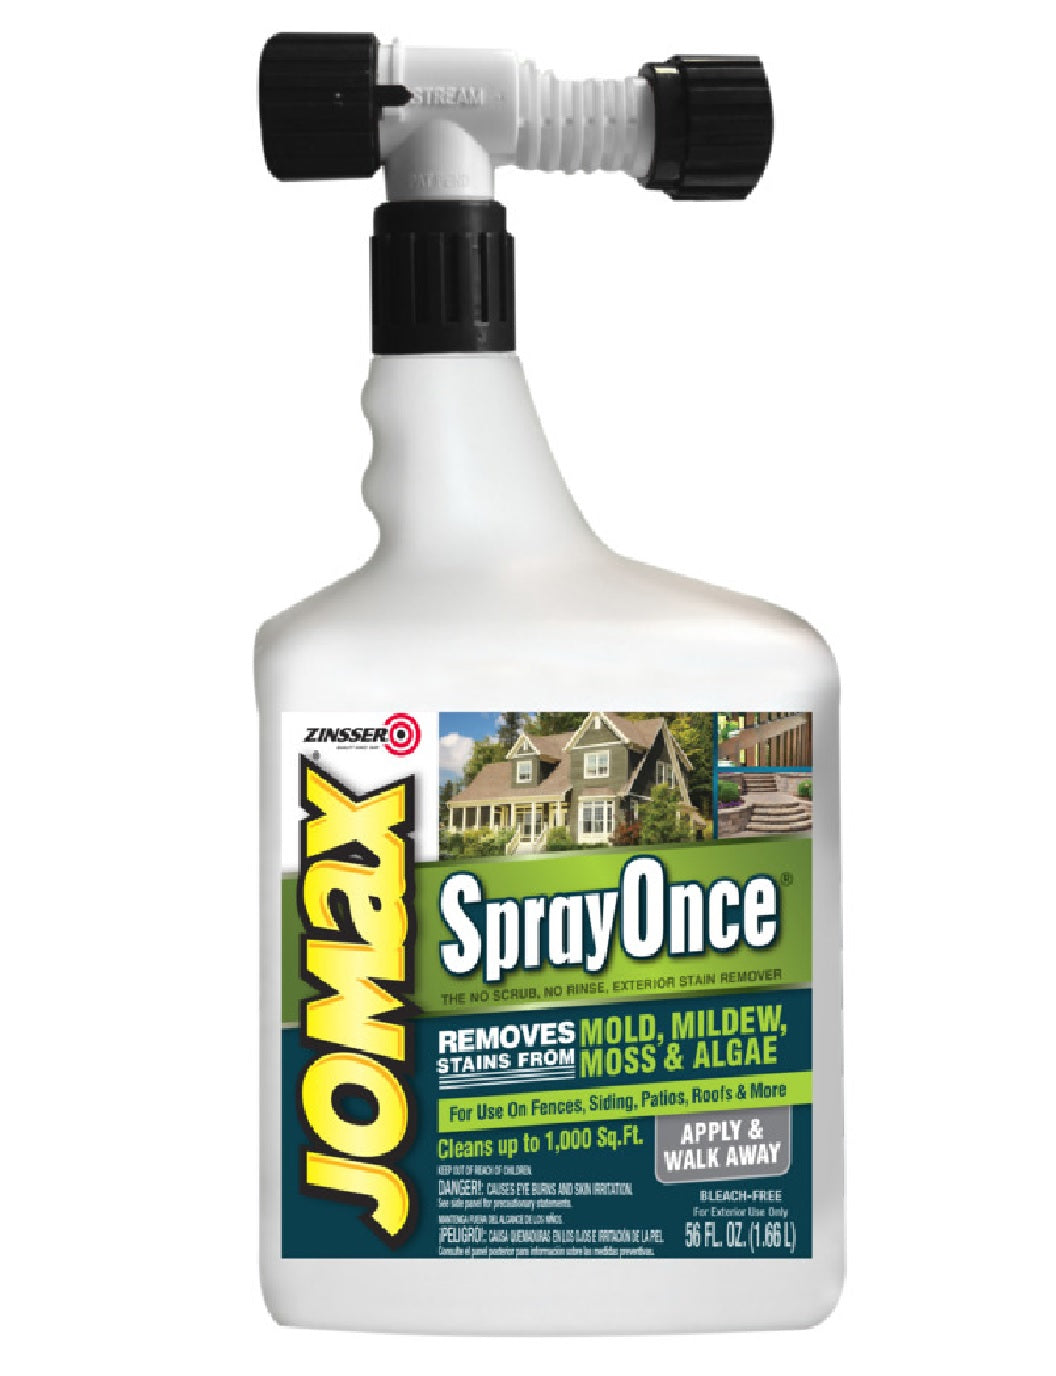 Rust-Oleum 343598 Jomax Stain Remover Exterior Spray, 56 Ounce